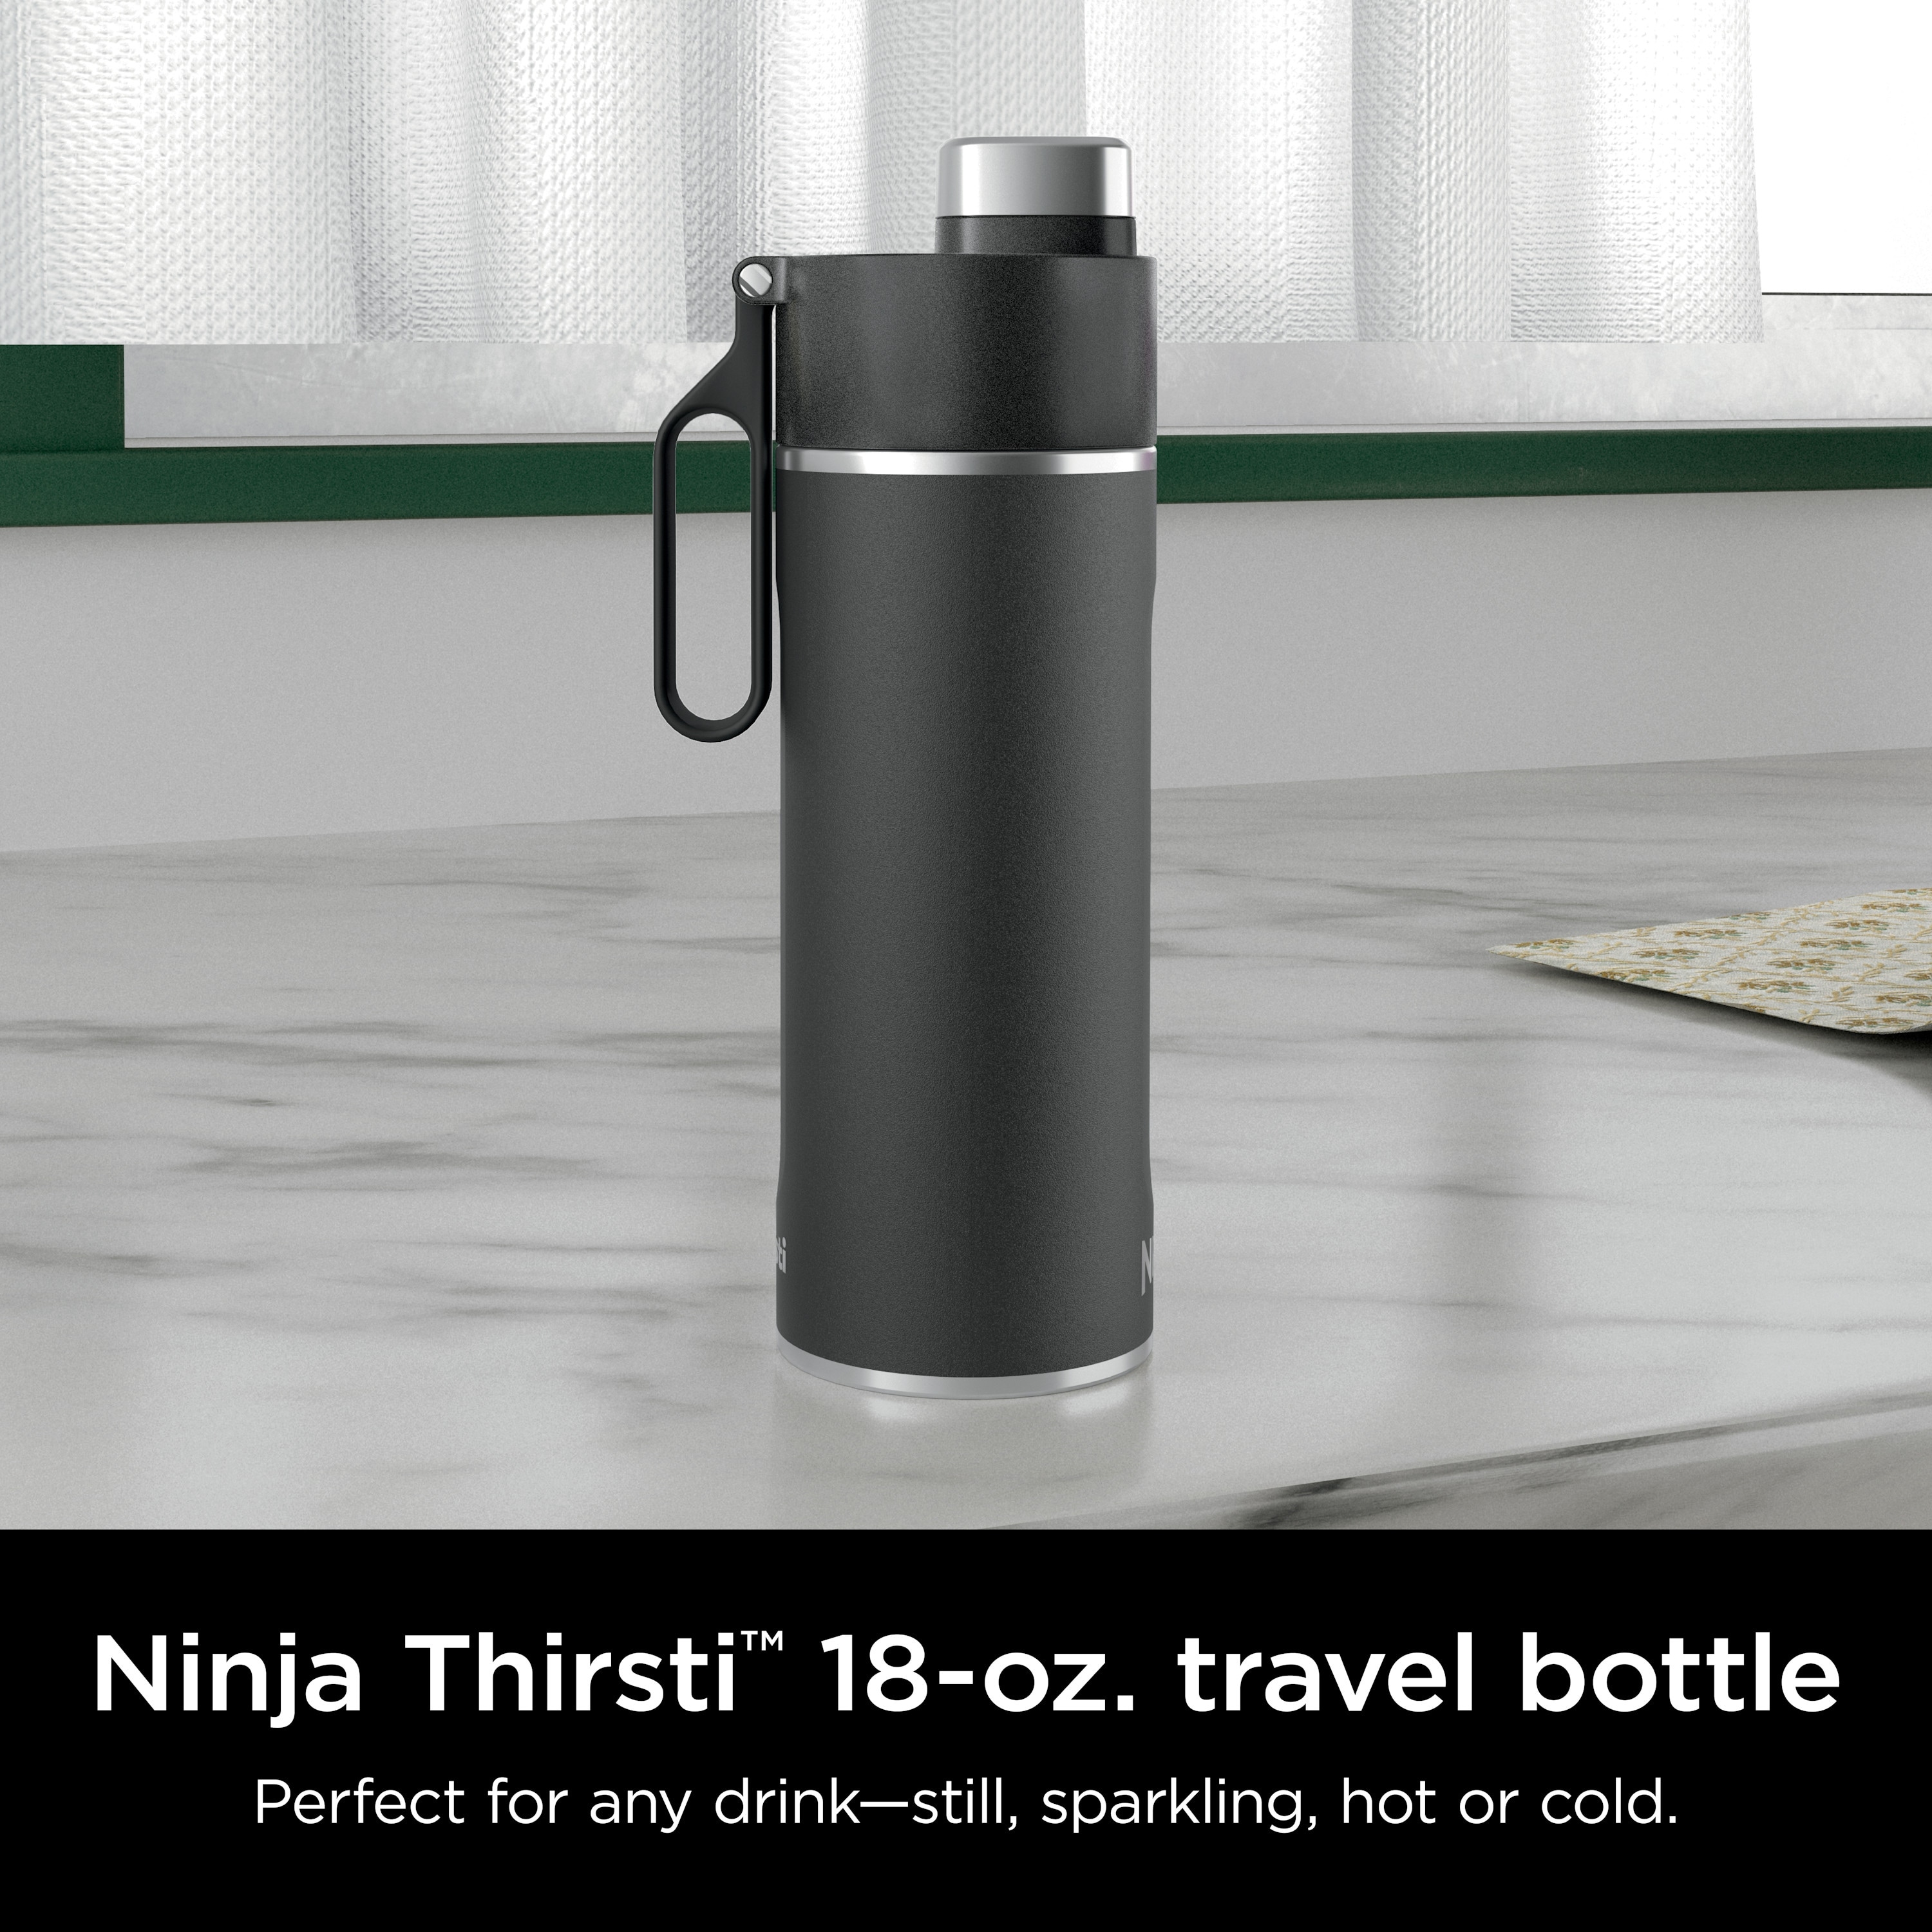 https://ak1.ostkcdn.com/images/products/is/images/direct/936cca965d1b4b2b36d6829d8c89faca72a83f2e/Ninja-Thirsti-18oz.-Travel-Bottle.jpg